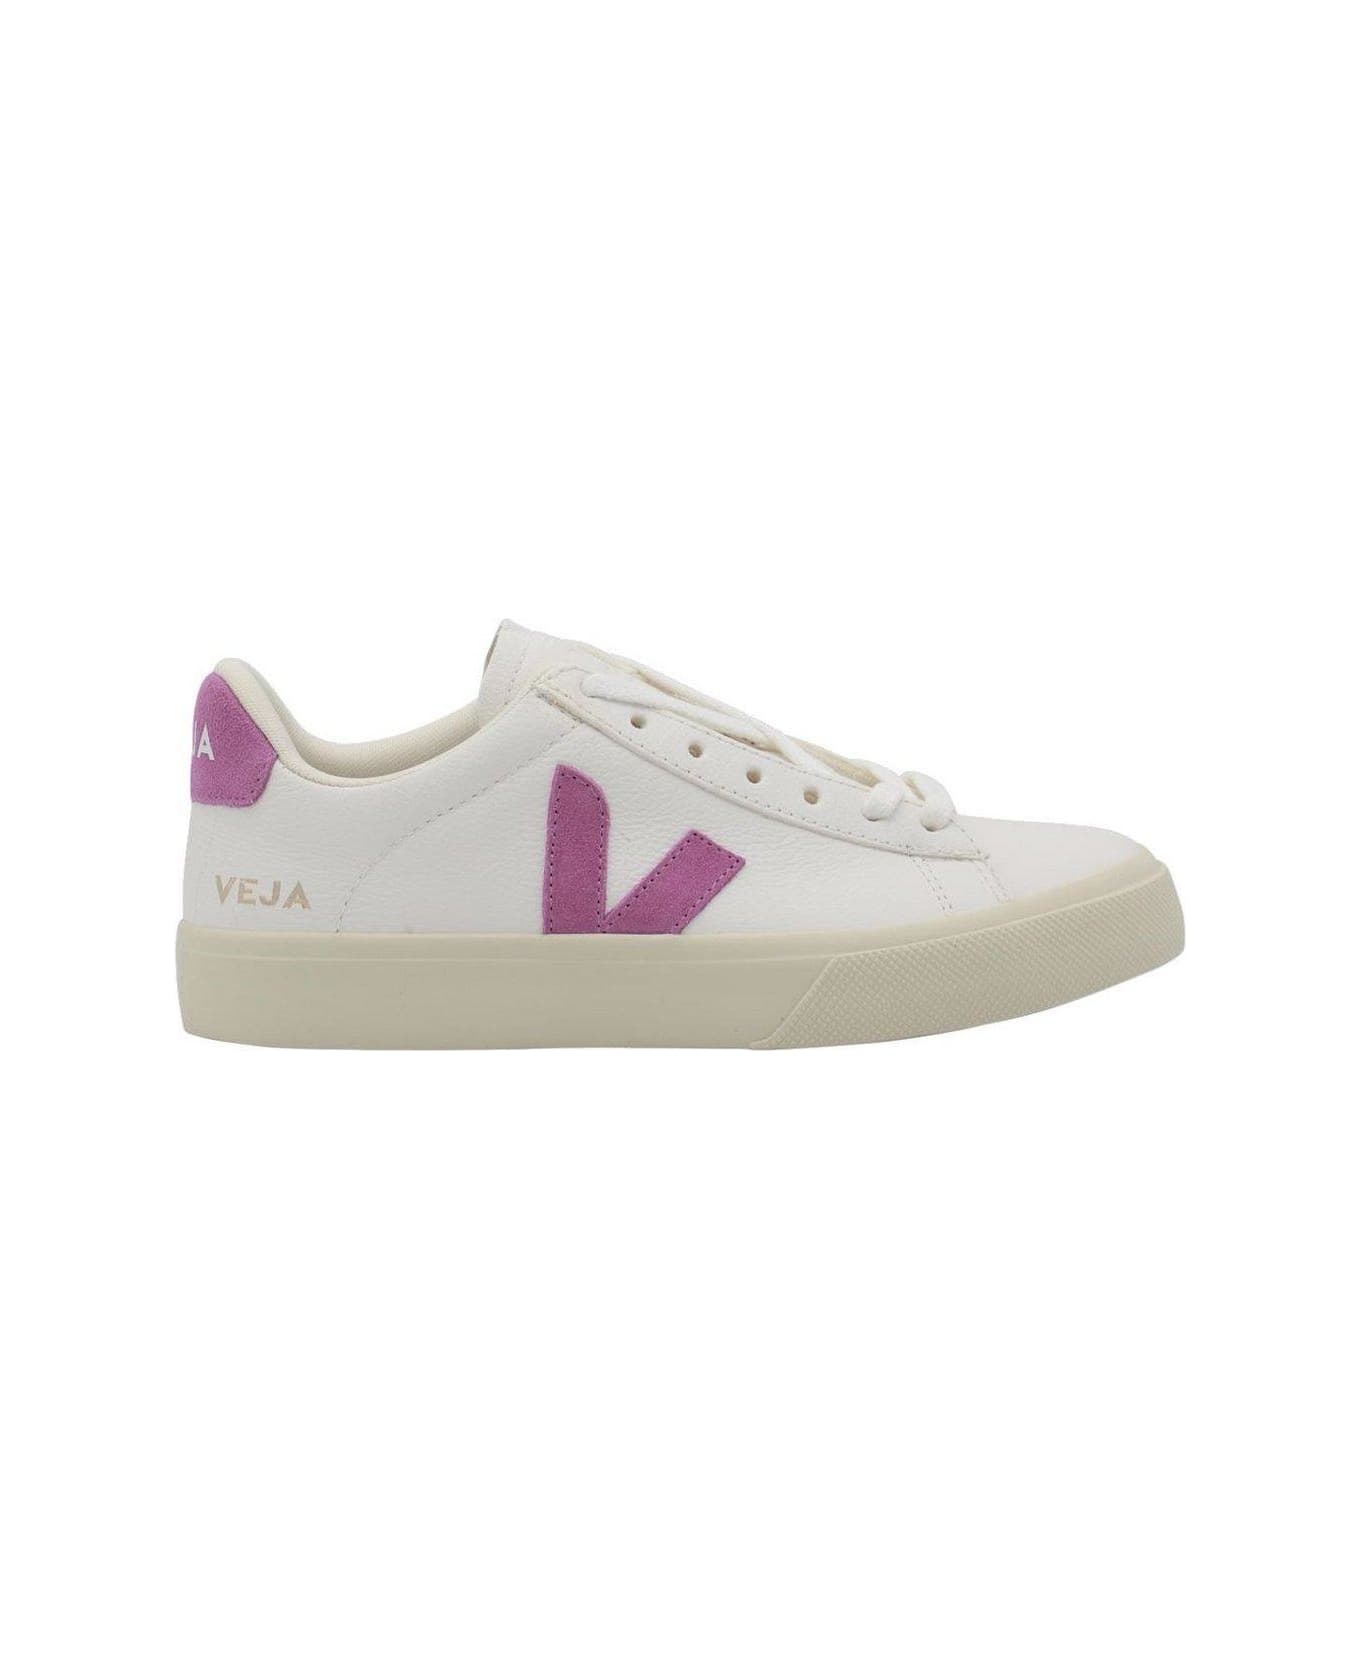 Veja Campo Logo Patch Sneakers - White/Mulberry